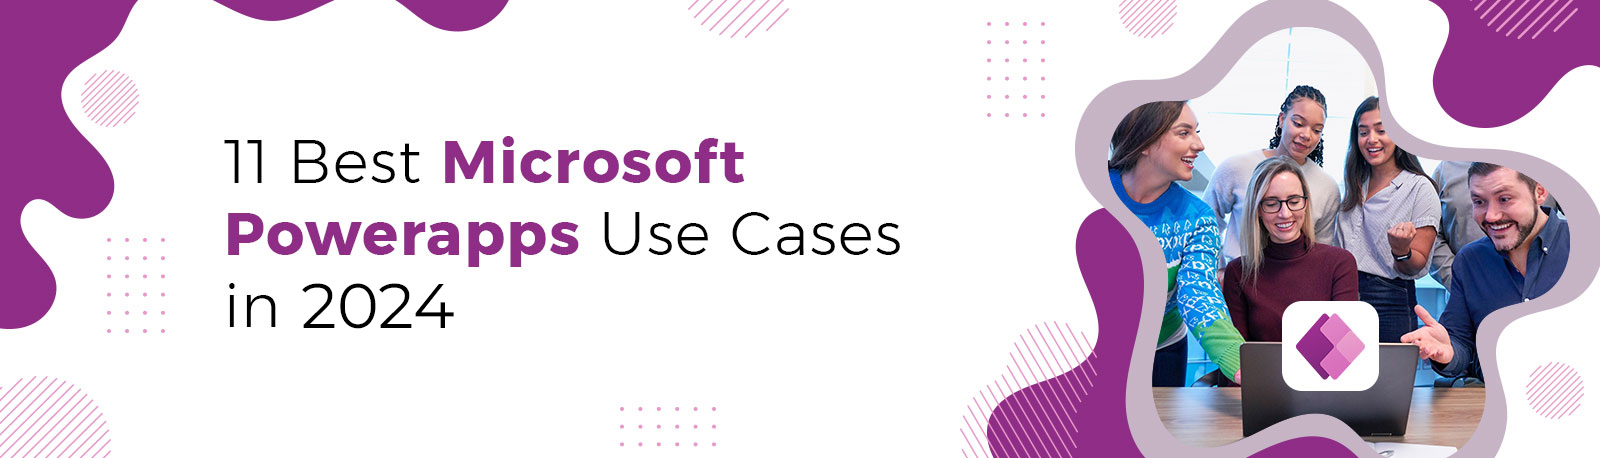 Powerapps Use Cases